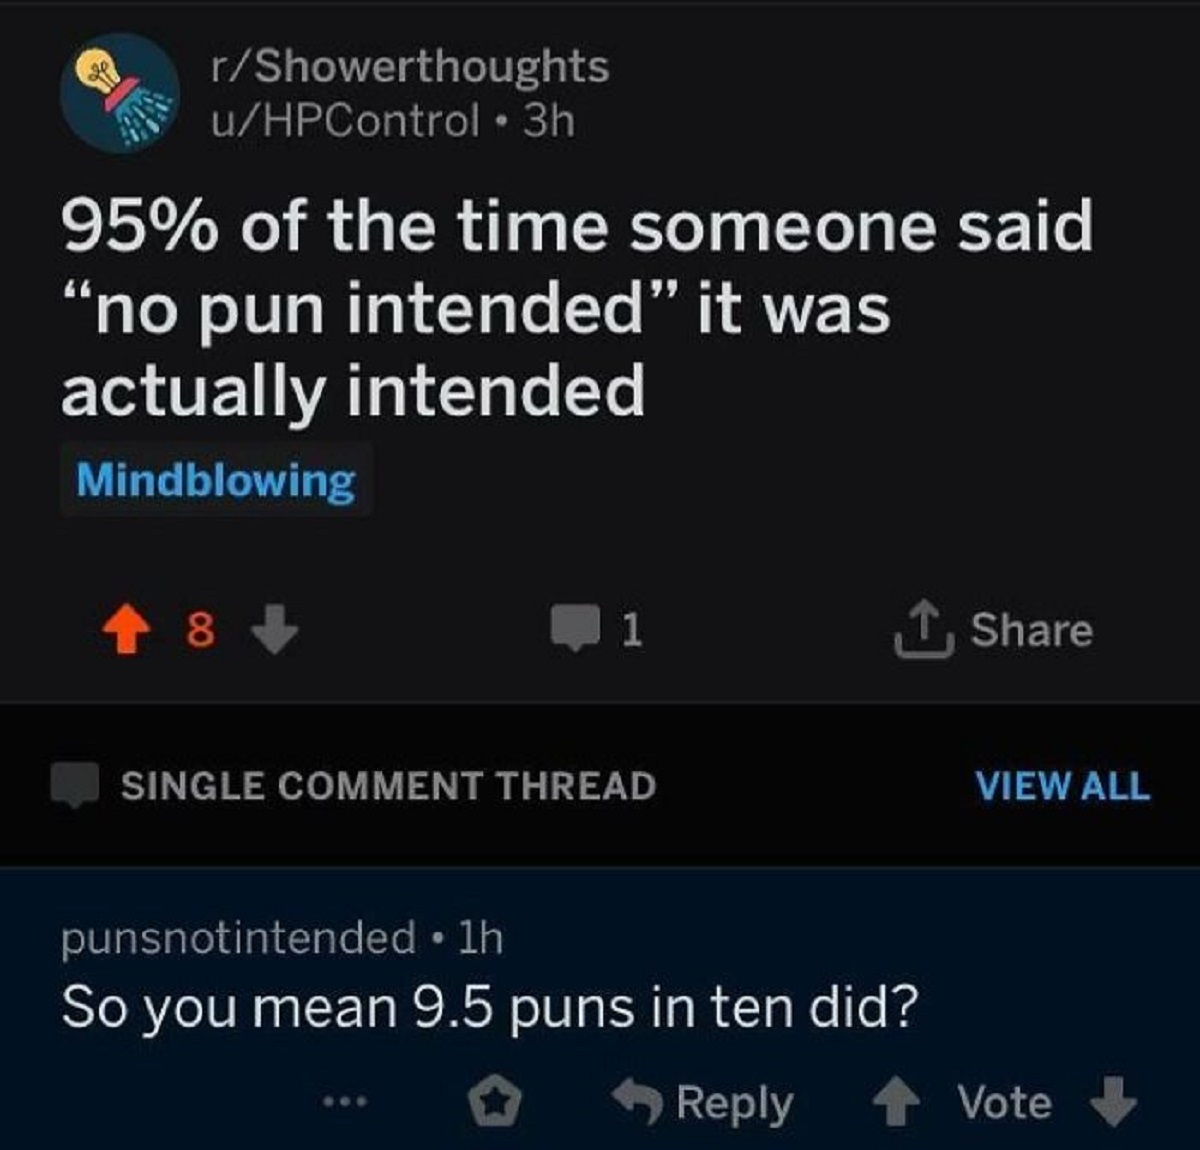 funny replies better than the original - screenshot - rShowerthoughts uHPControl 3h 95% of the time someone said "no pun intended" it was actually intended Mindblowing 8 1 Single Comment Thread punsnotintended. 1h So you mean 9.5 puns in ten did? View All